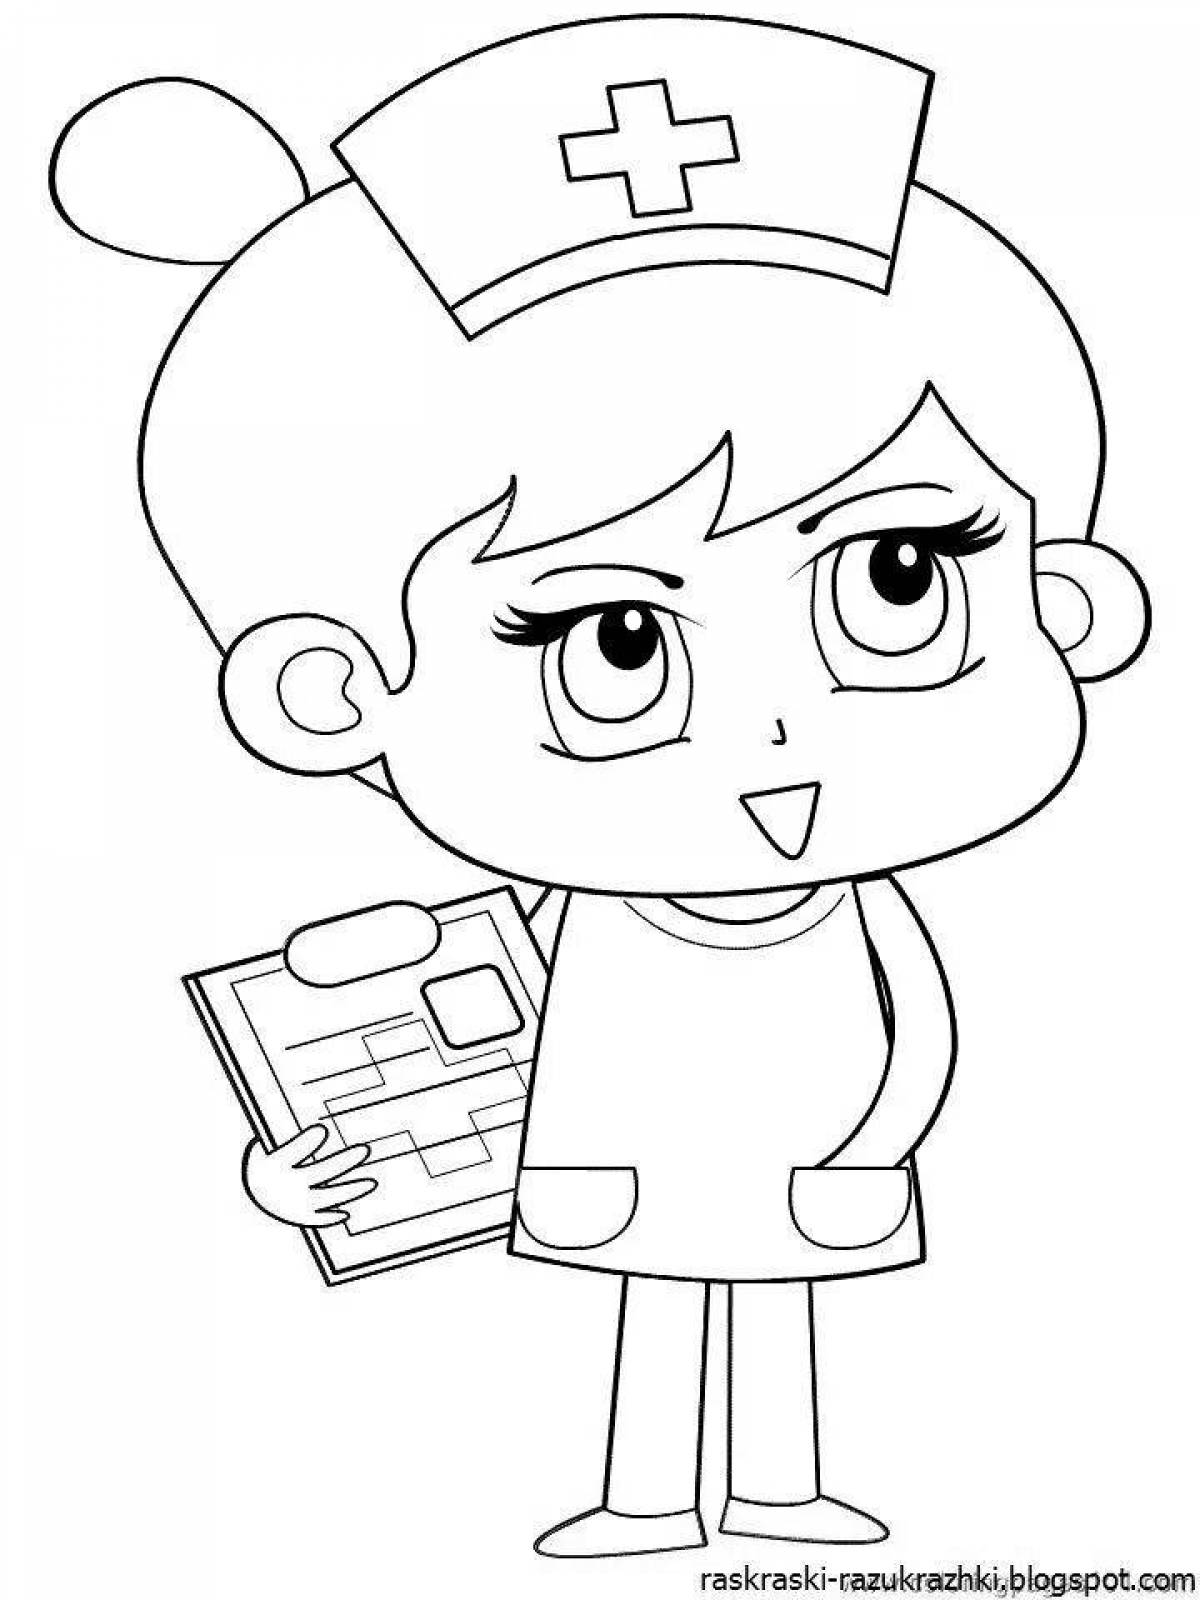 Coloring book playful doctor figurine